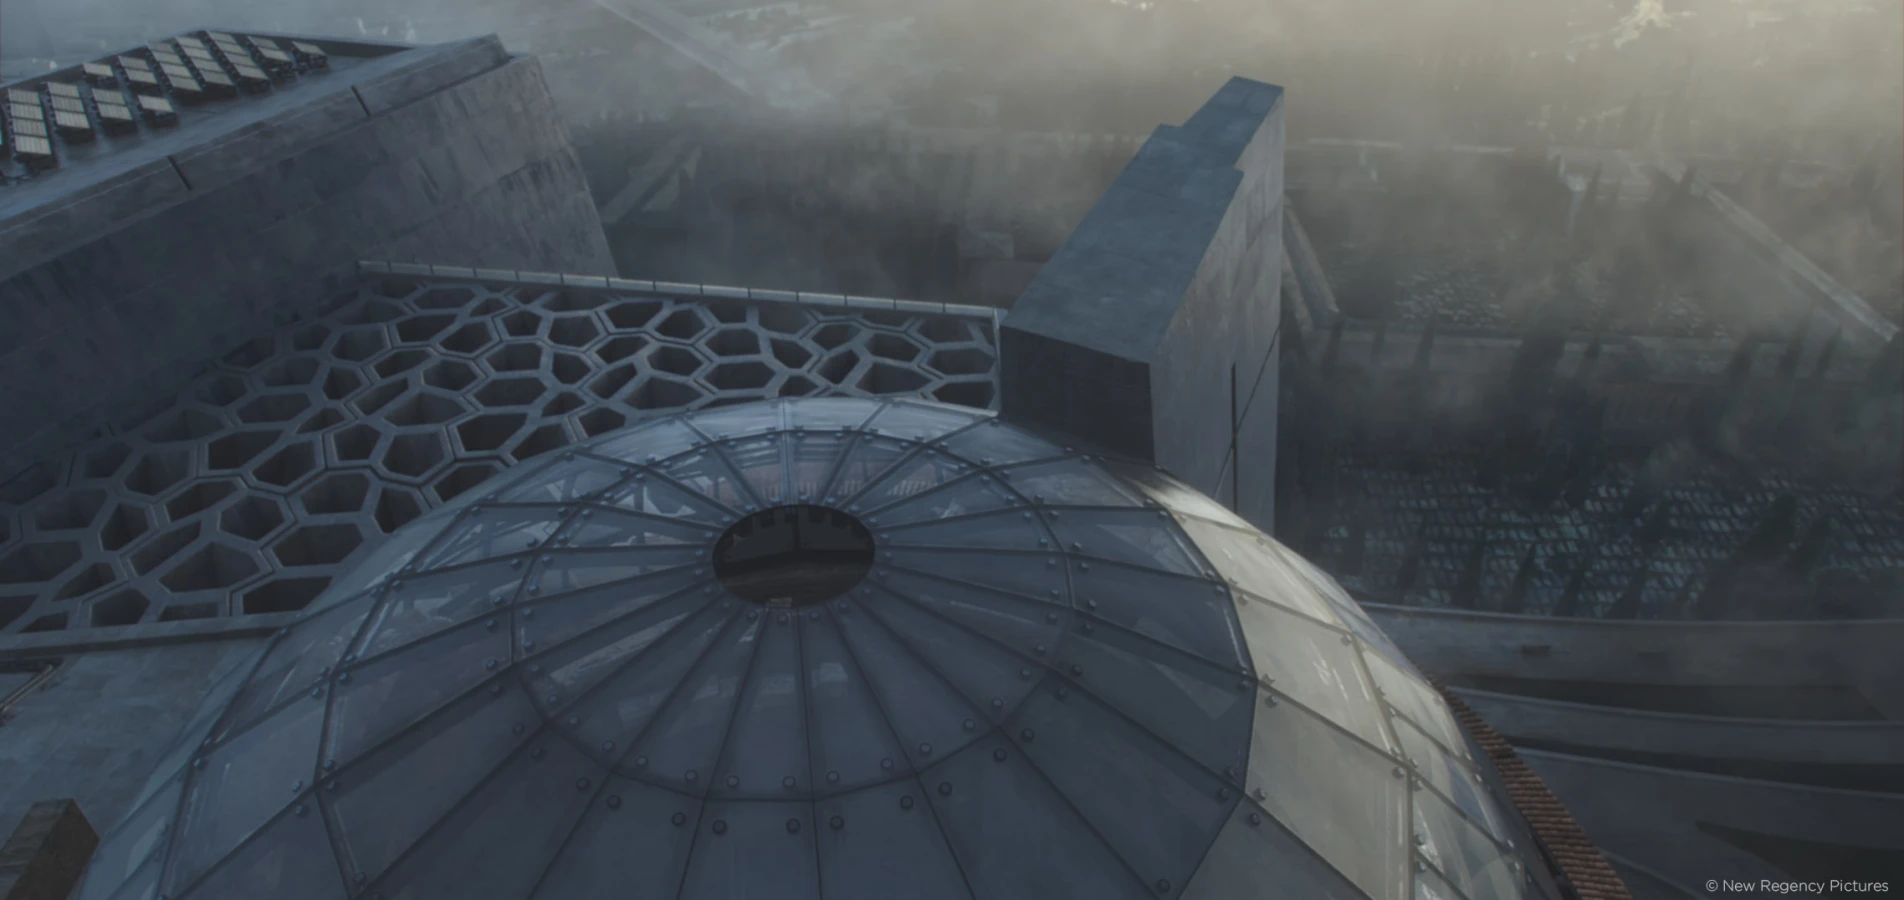  Assassins's Creed shot view dome and fog Raynault vfx 